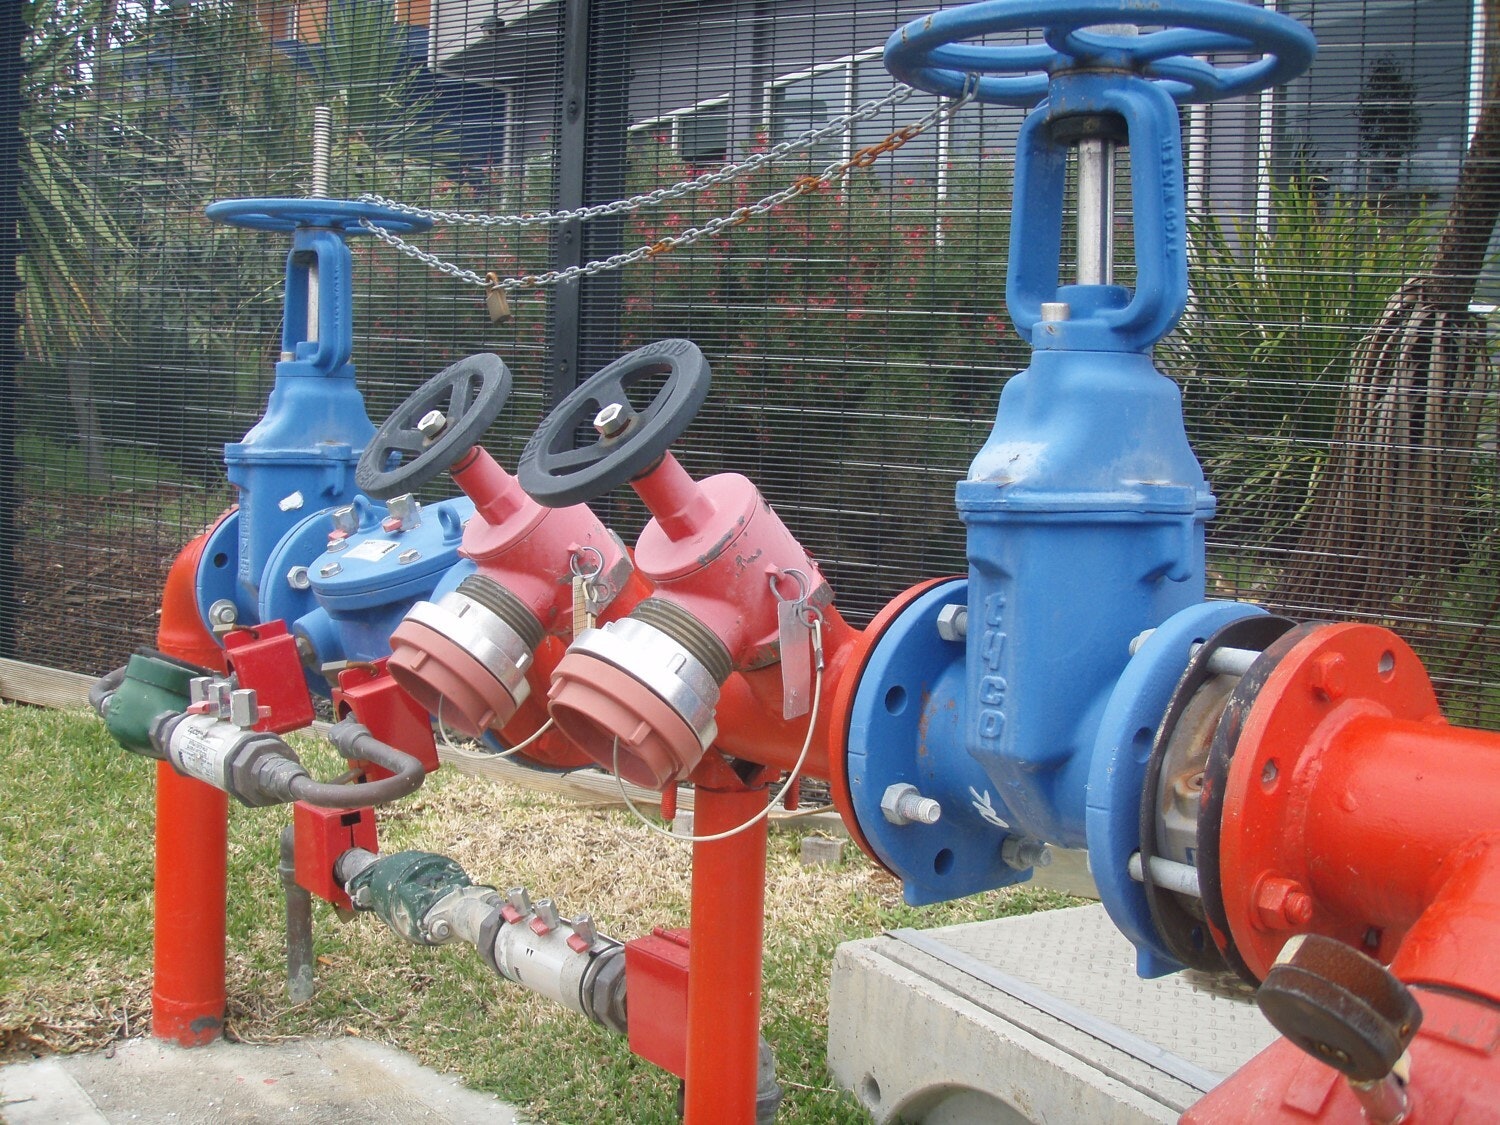 How to Install an Outdoor Irrigation Backflow Preventer